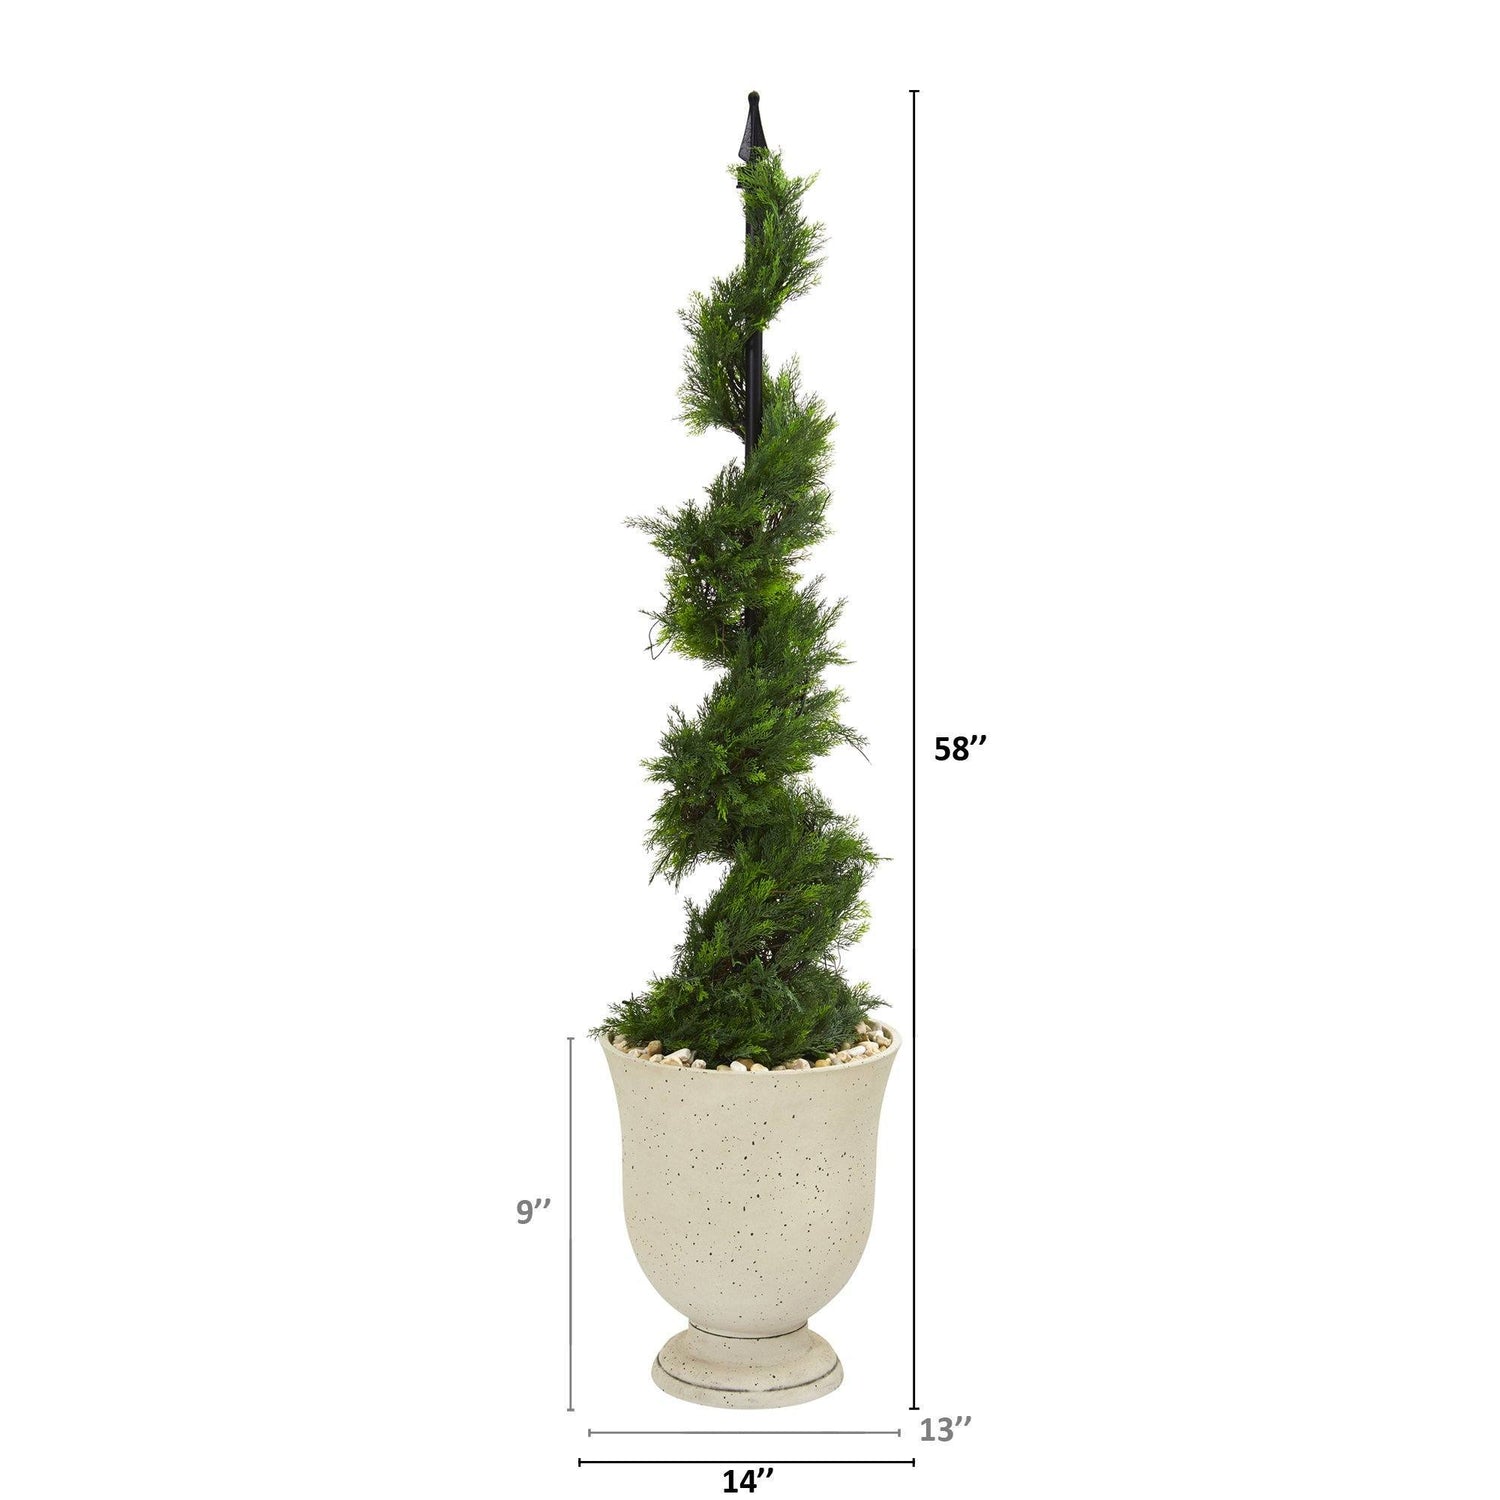 58” Cypress Artificial Spiral Topiary Tree in Decorative Urn